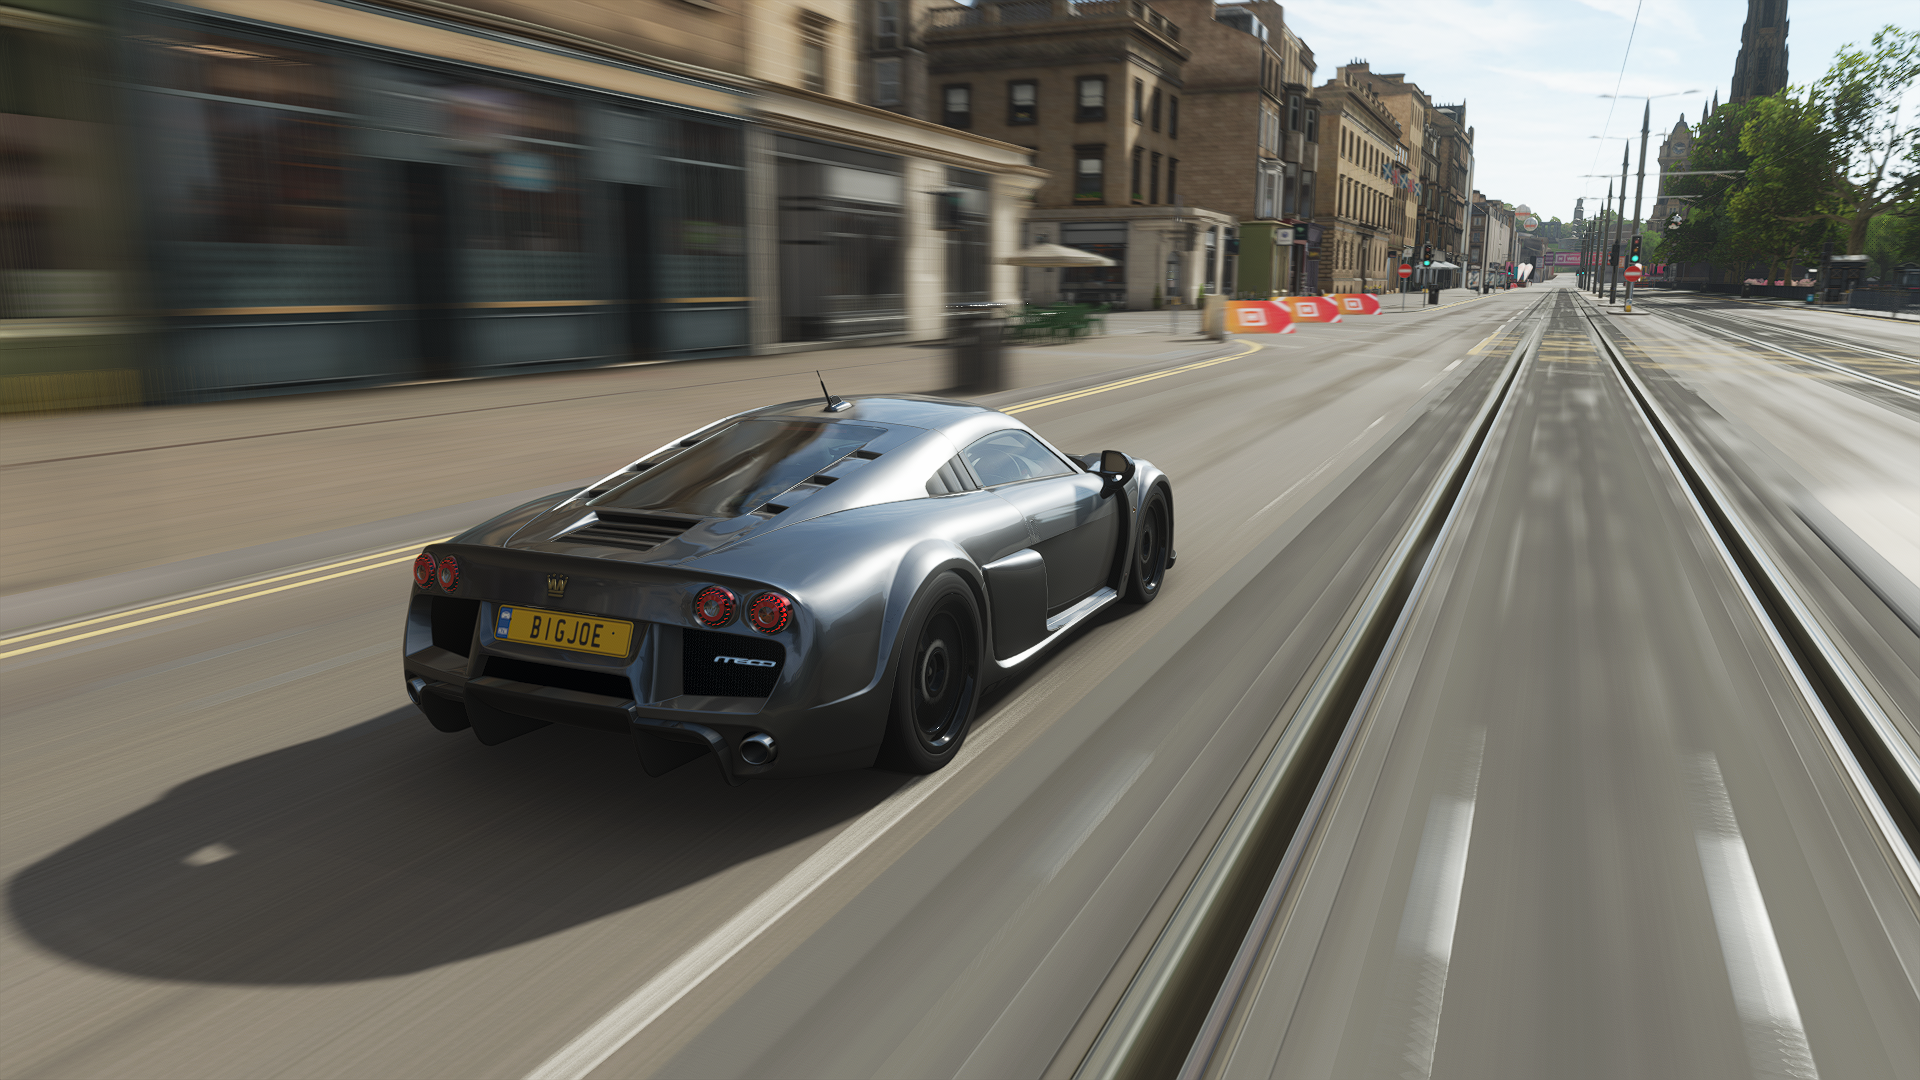 General 1920x1080 Forza Horizon 4 Forza Horizon Forza car driving CGI Noble M600 video games vehicle rear view road licence plates blurred blurry background trees building PlaygroundGames British cars